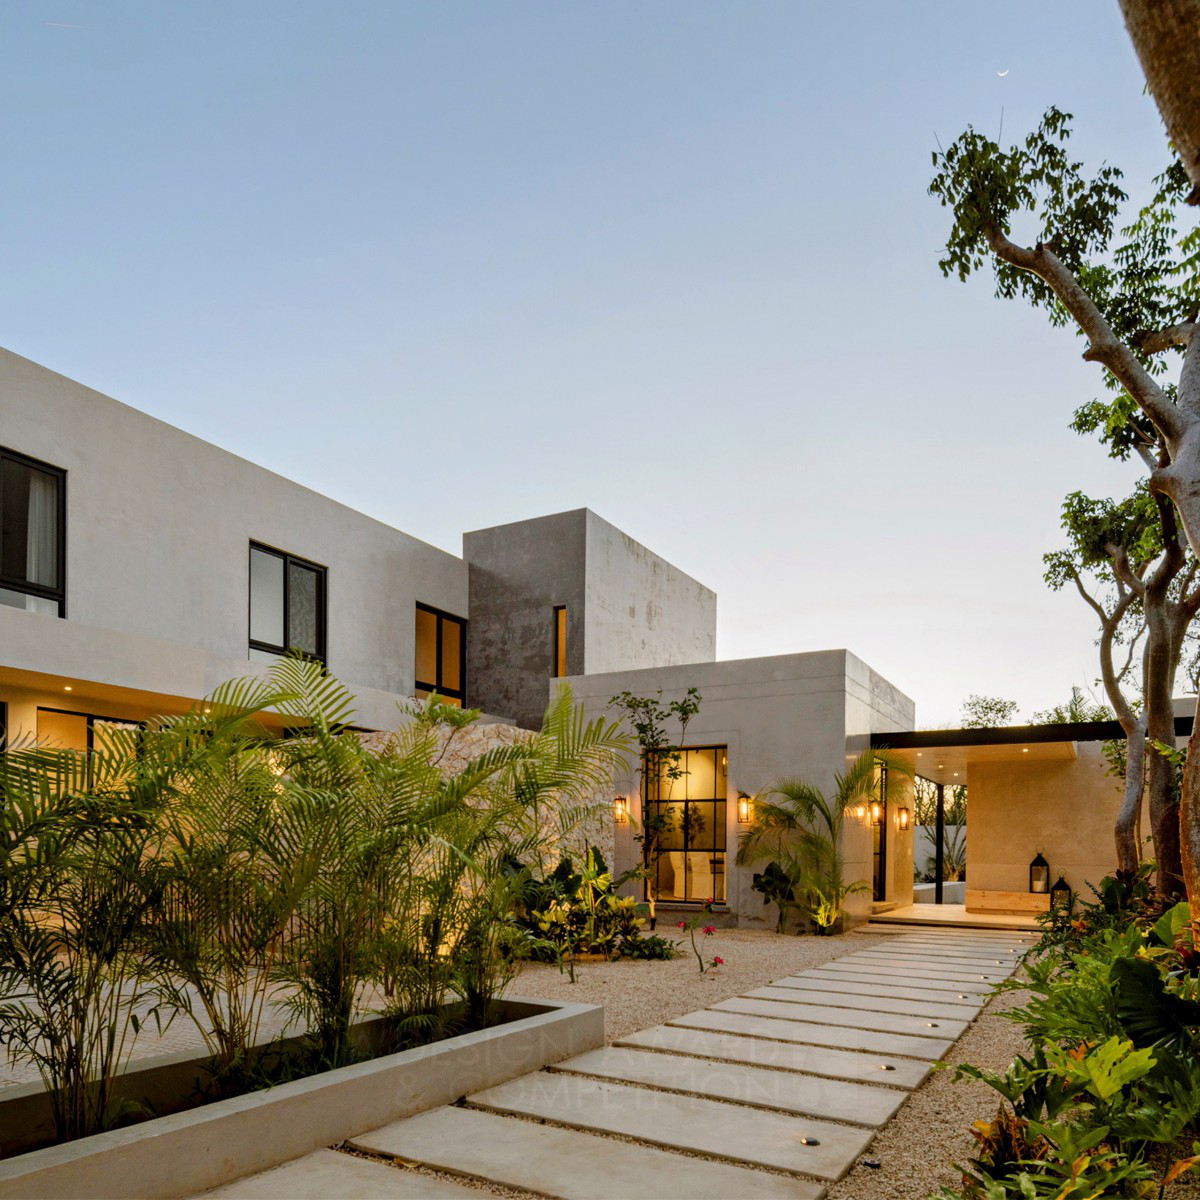 Maya Ruz wins Silver at the prestigious A' Architecture, Building and Structure Design Award with Casa de Mar Single Family Residence .